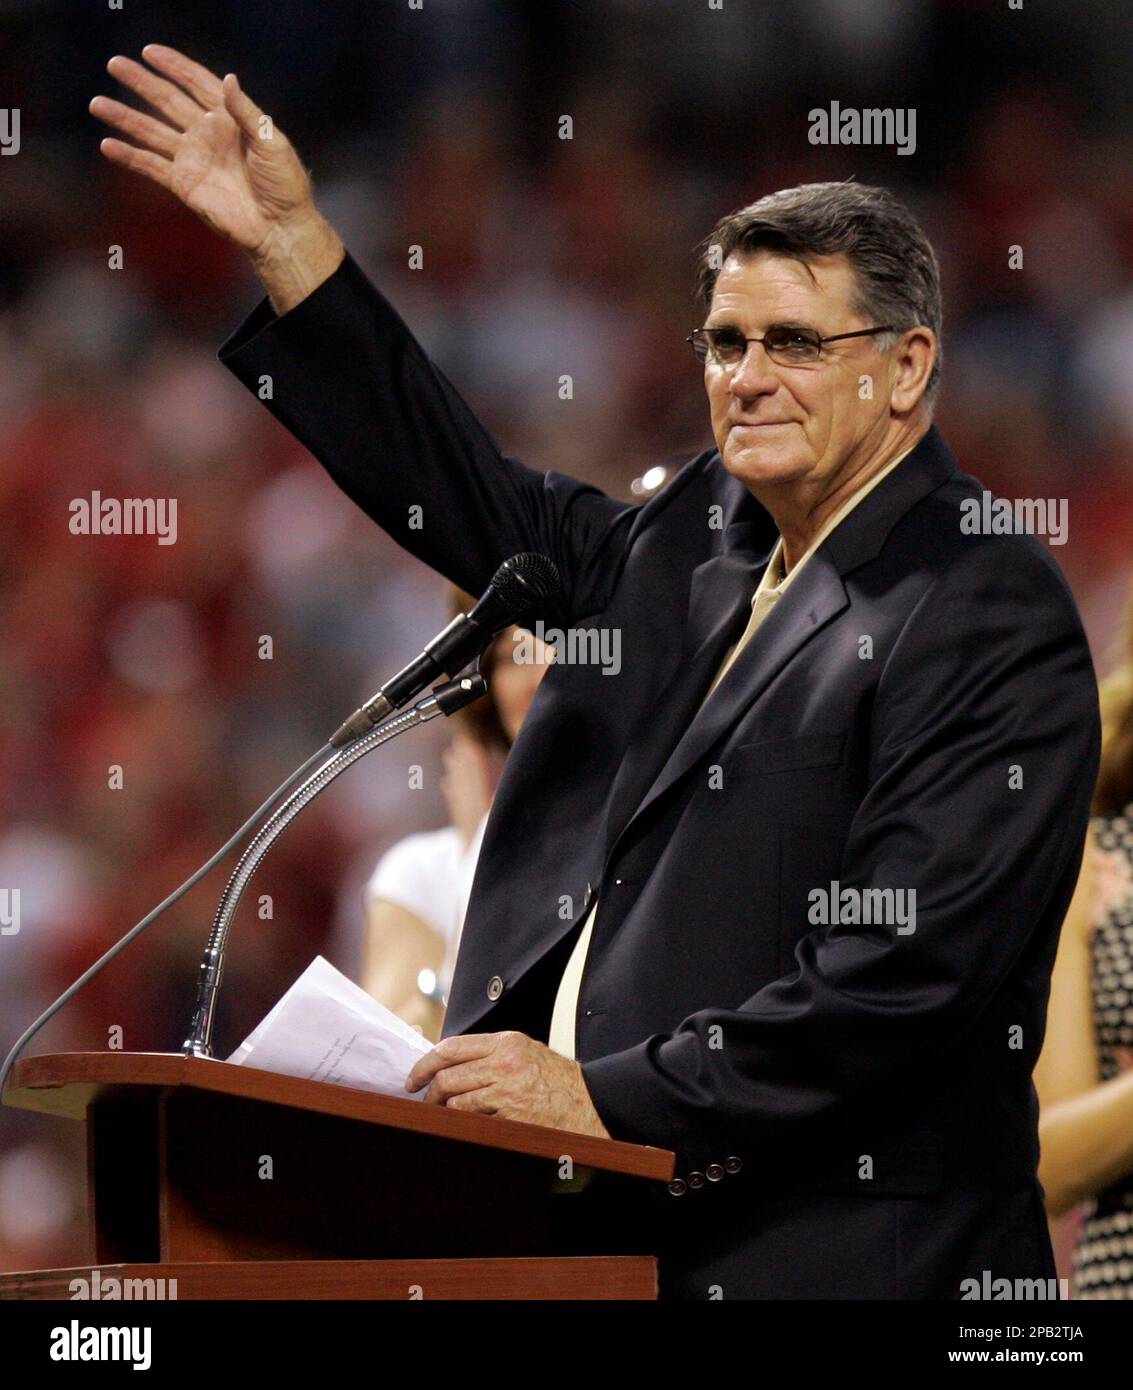 St. Louis, United States. 17th July, 2014. St. Louis Cardinals broadcaster Mike  Shannon shown at his 75th birthday July 17, 2014. Shannon died on April 30,  2023 at the age of 83.